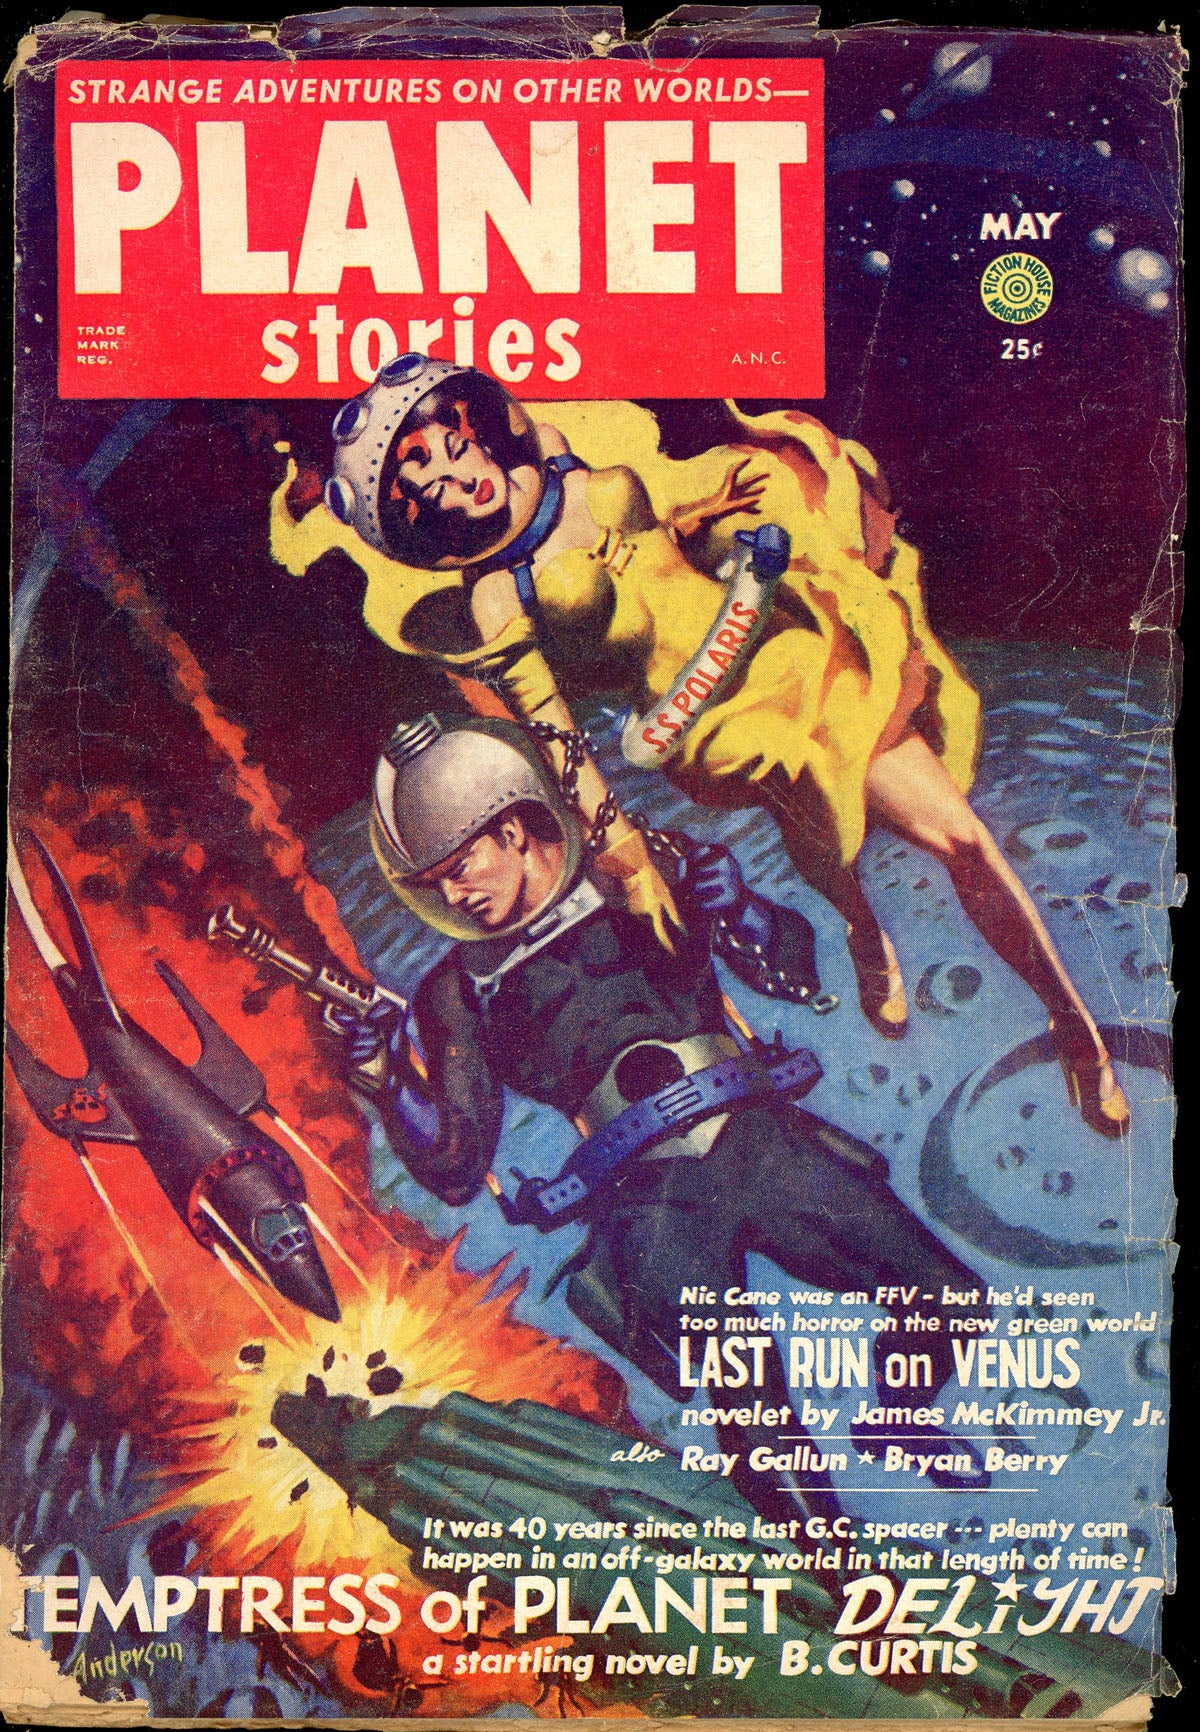 PLANET STORIES | PHILIP K. DICK, ed PLANET STORIES. May 1953